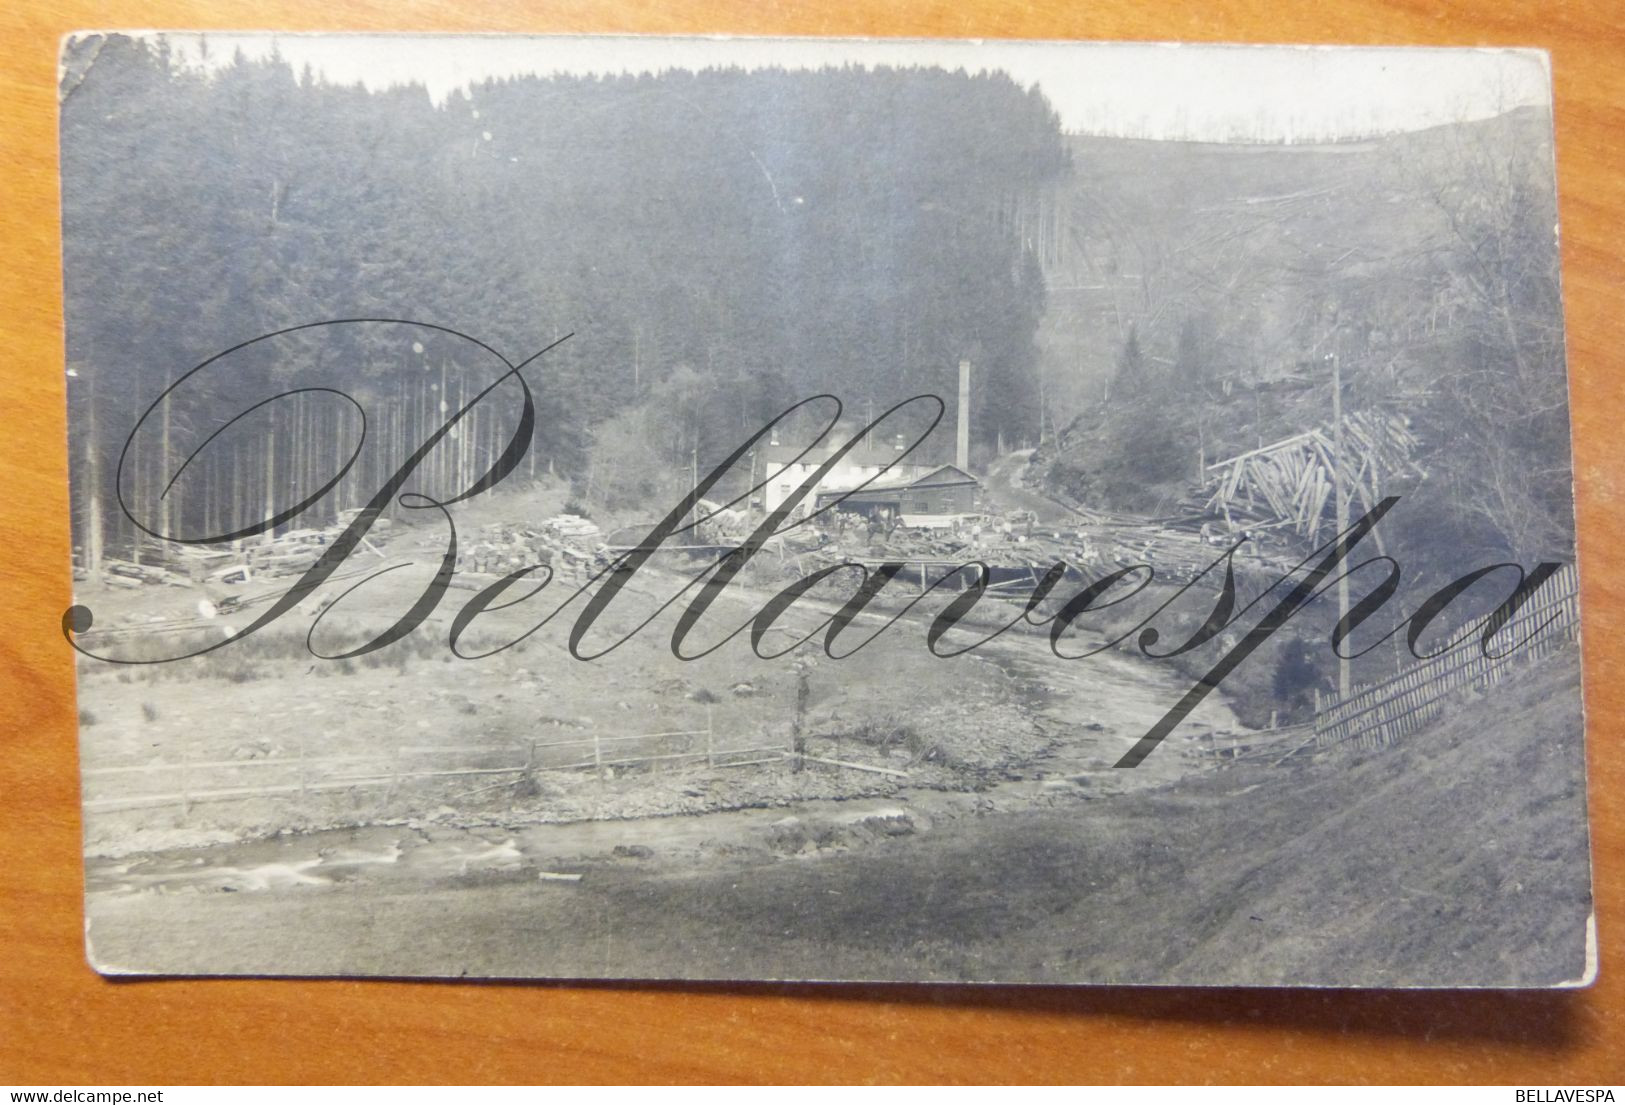 Unkown Photo Foto -real Picture Post Card-RPPC-Lumberlogging Houtzagerij. Verzonden Sended 1926 -Ardennes? Wallonie ?Be? - Métiers